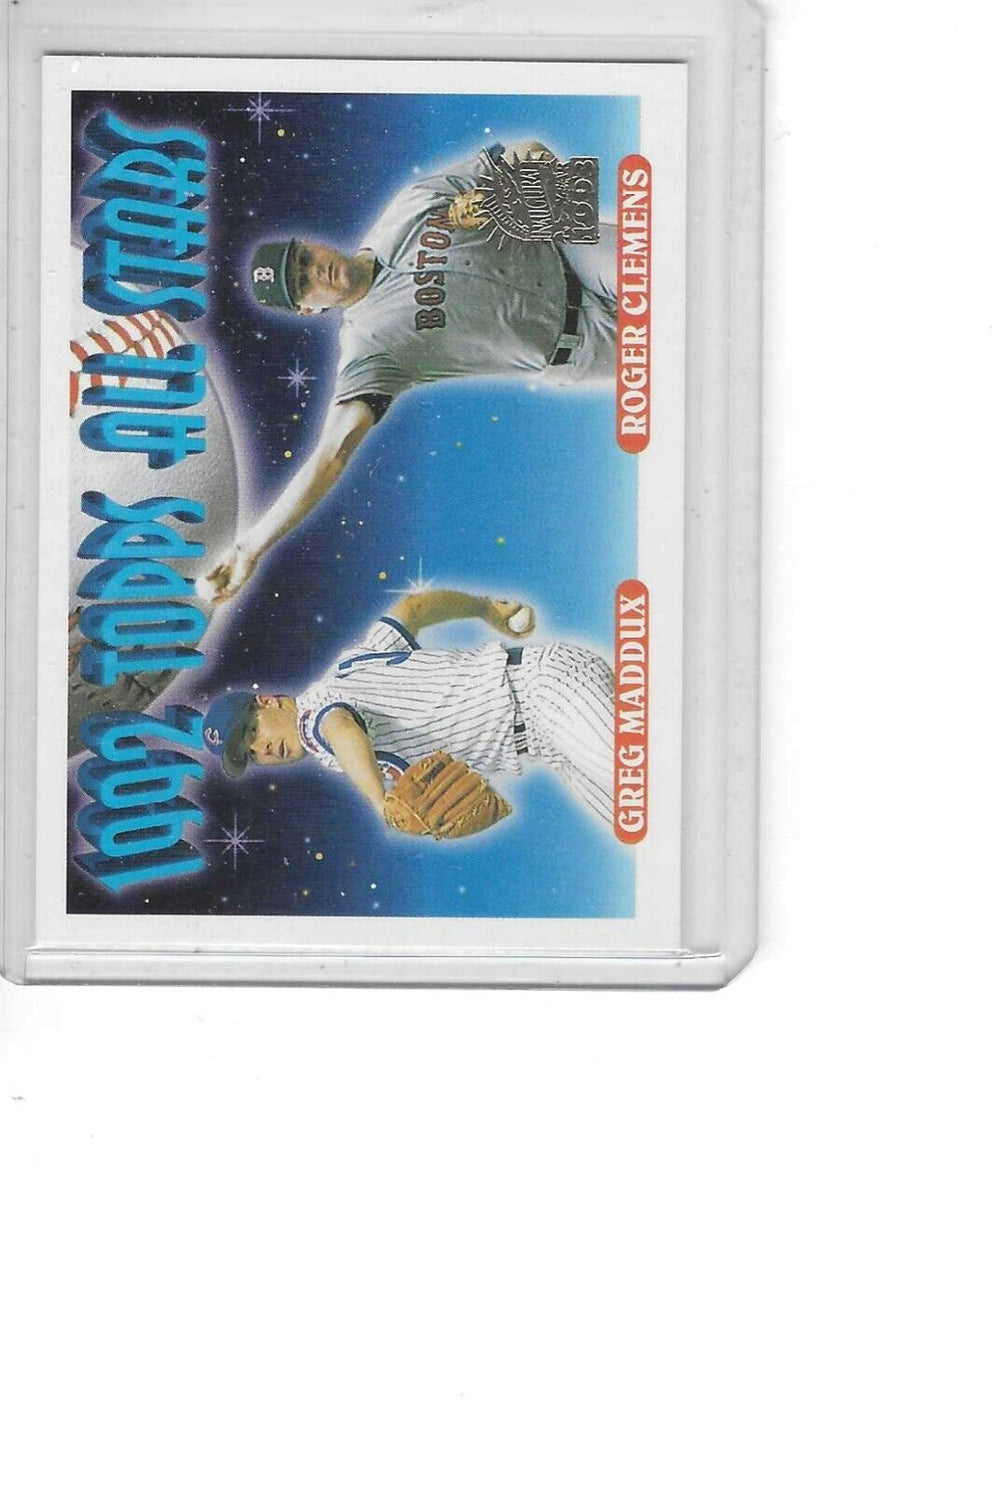 Roger Clemens and Greg Maddux 1993 Topps Micro All Stars Series Mint Card #409